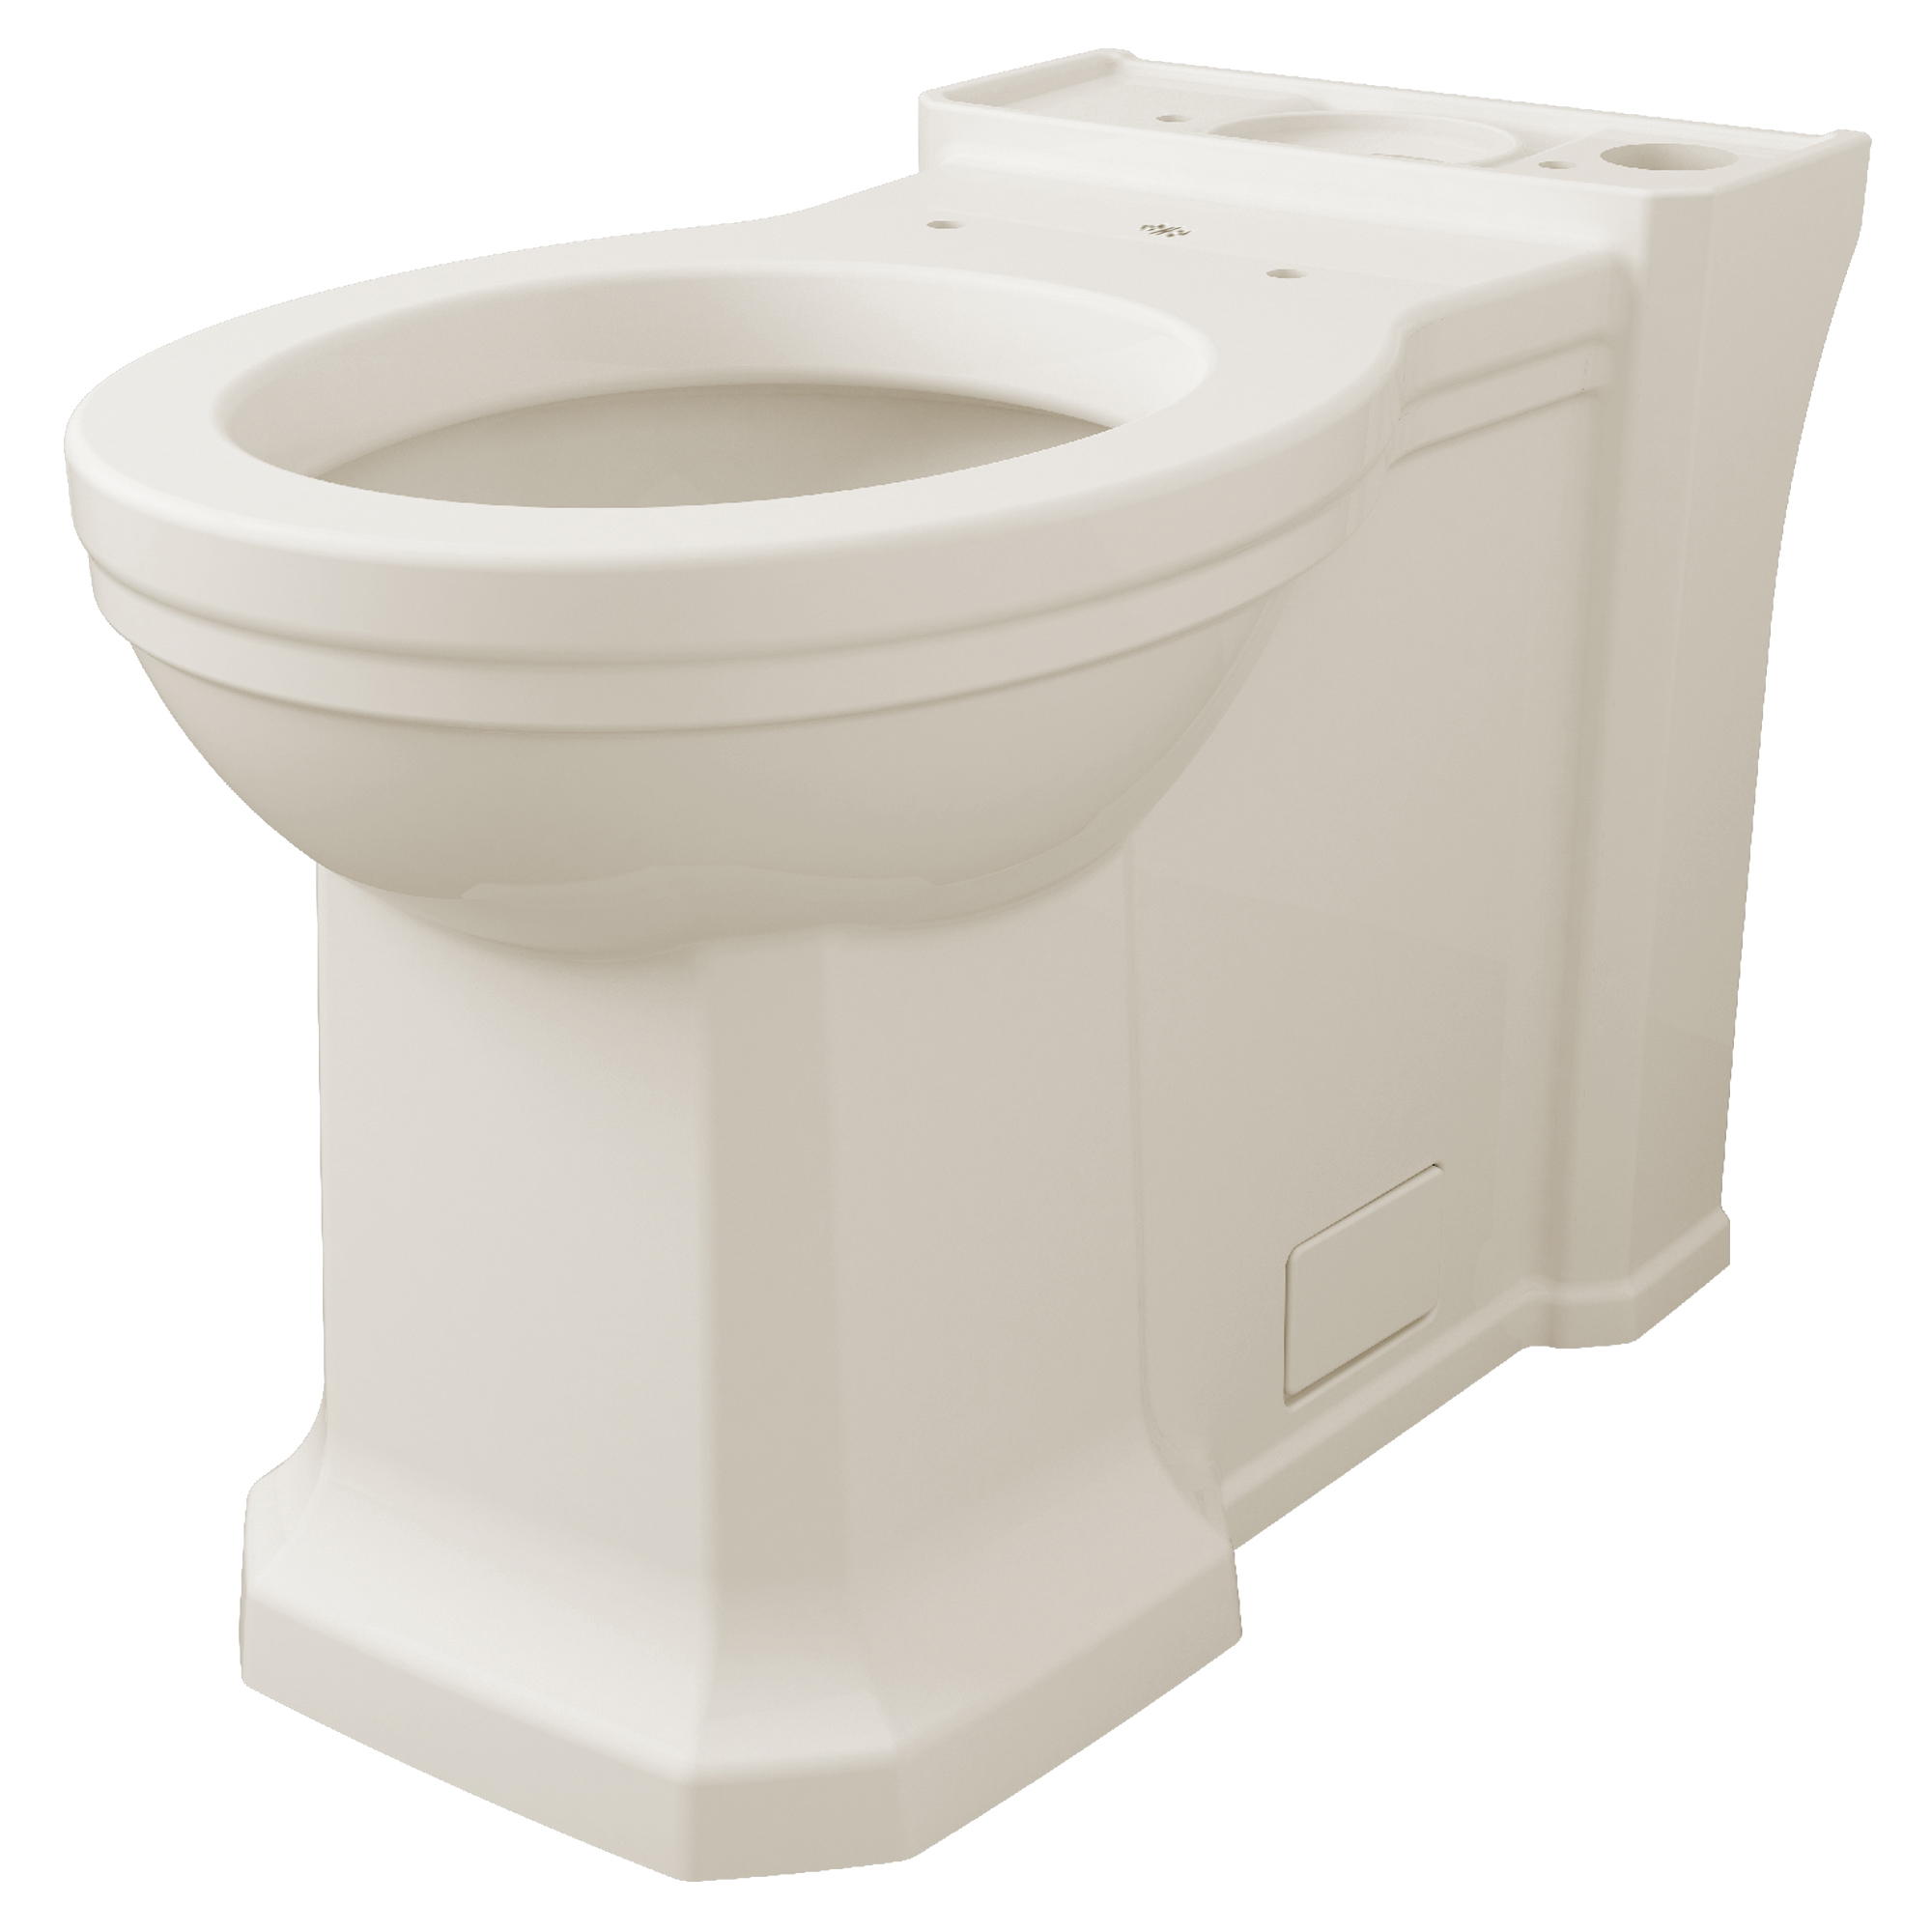 Fitzgerald® Chair-Height Round-Front Toilet Bowl with Seat